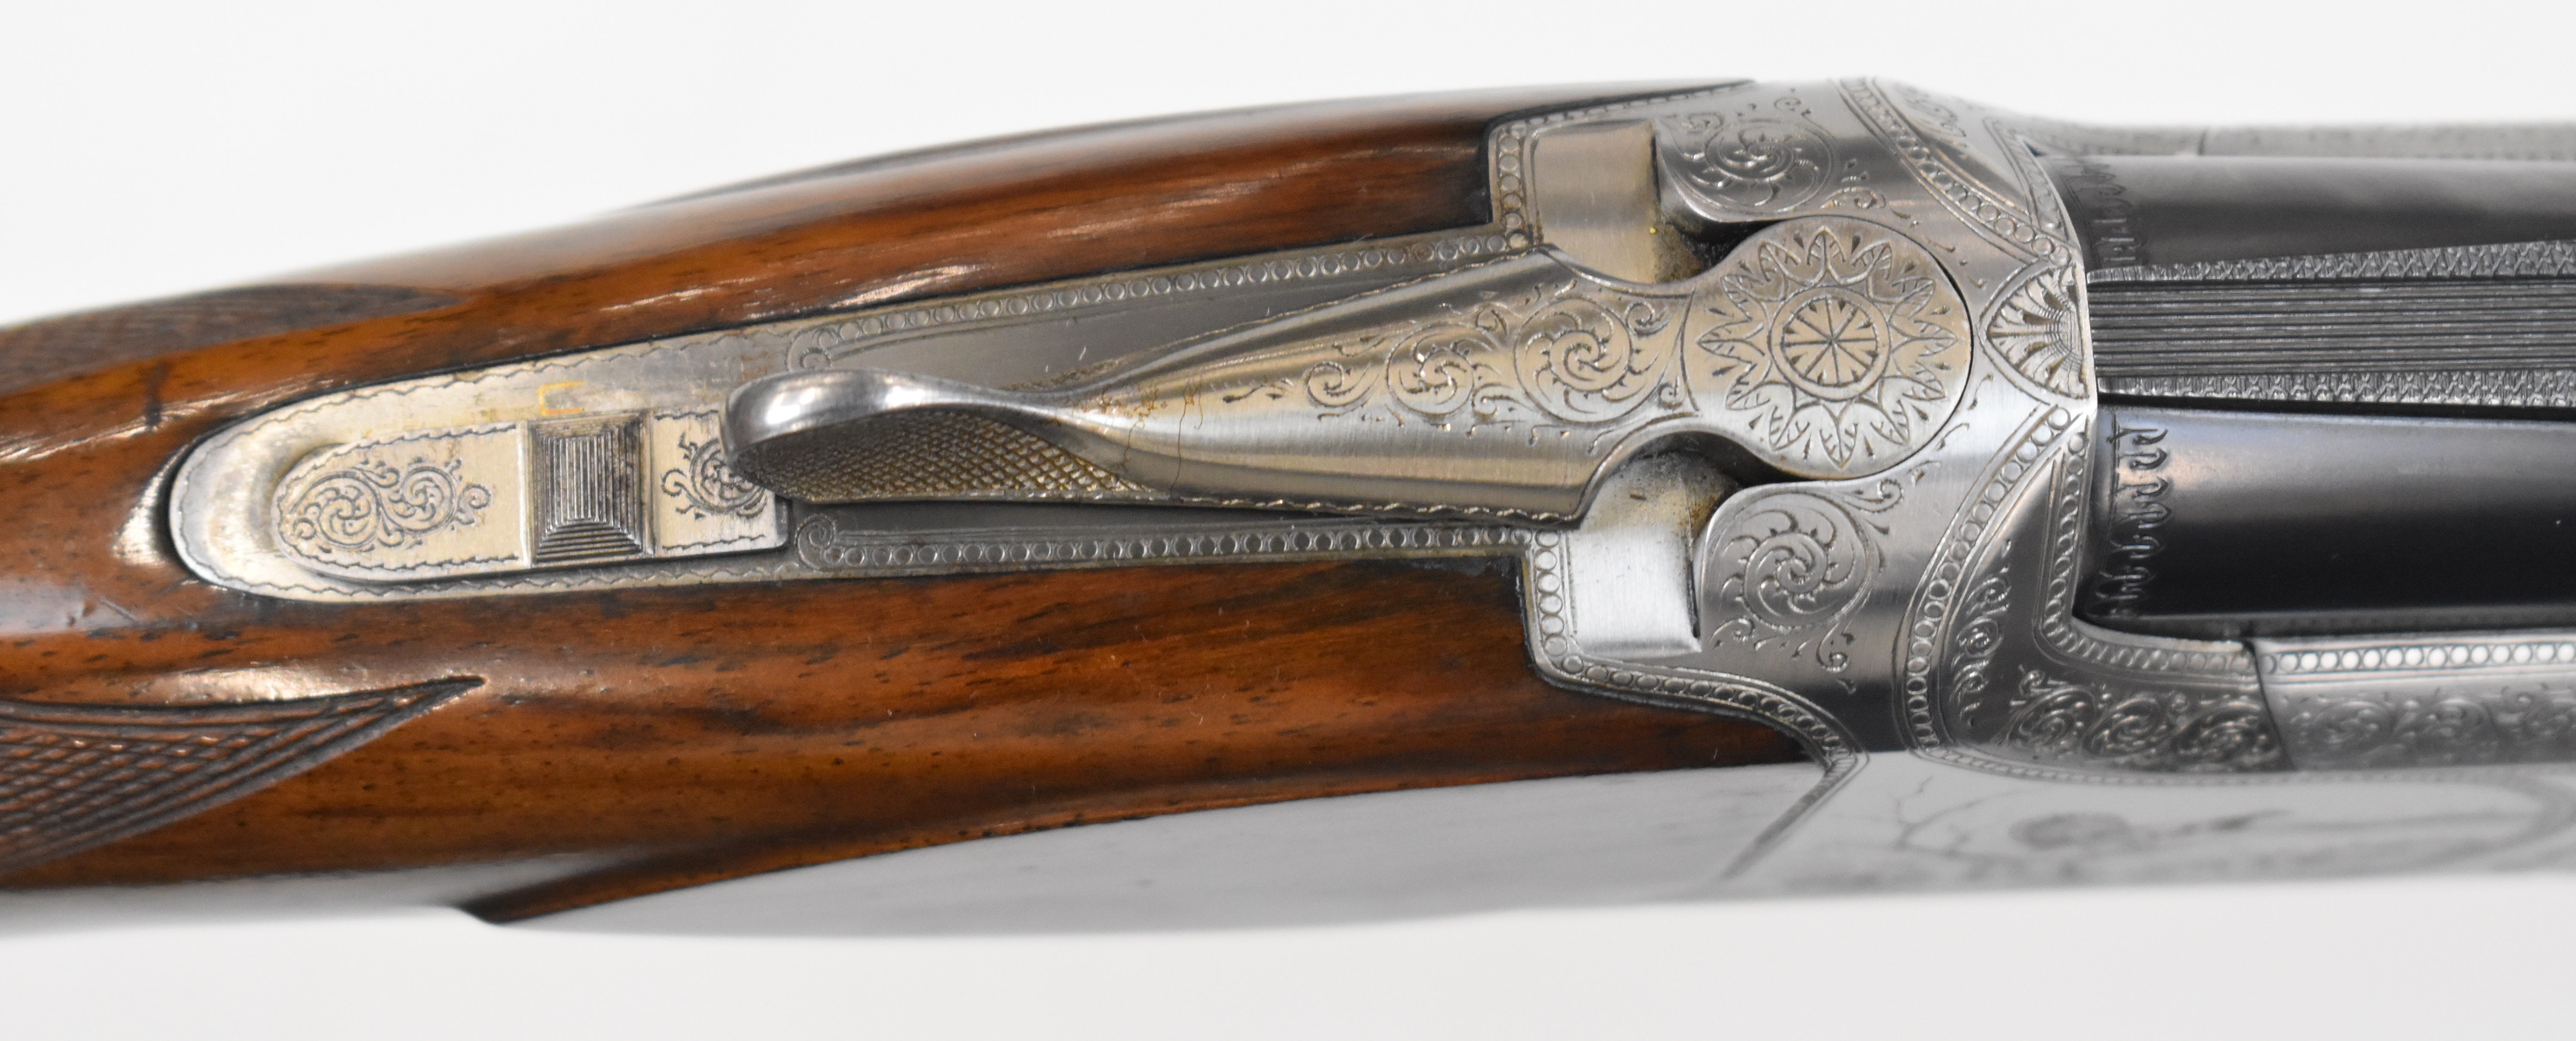 Browning B2 12 bore over and under shotgun with engraved scenes of birds to the locks and underside, - Image 8 of 12